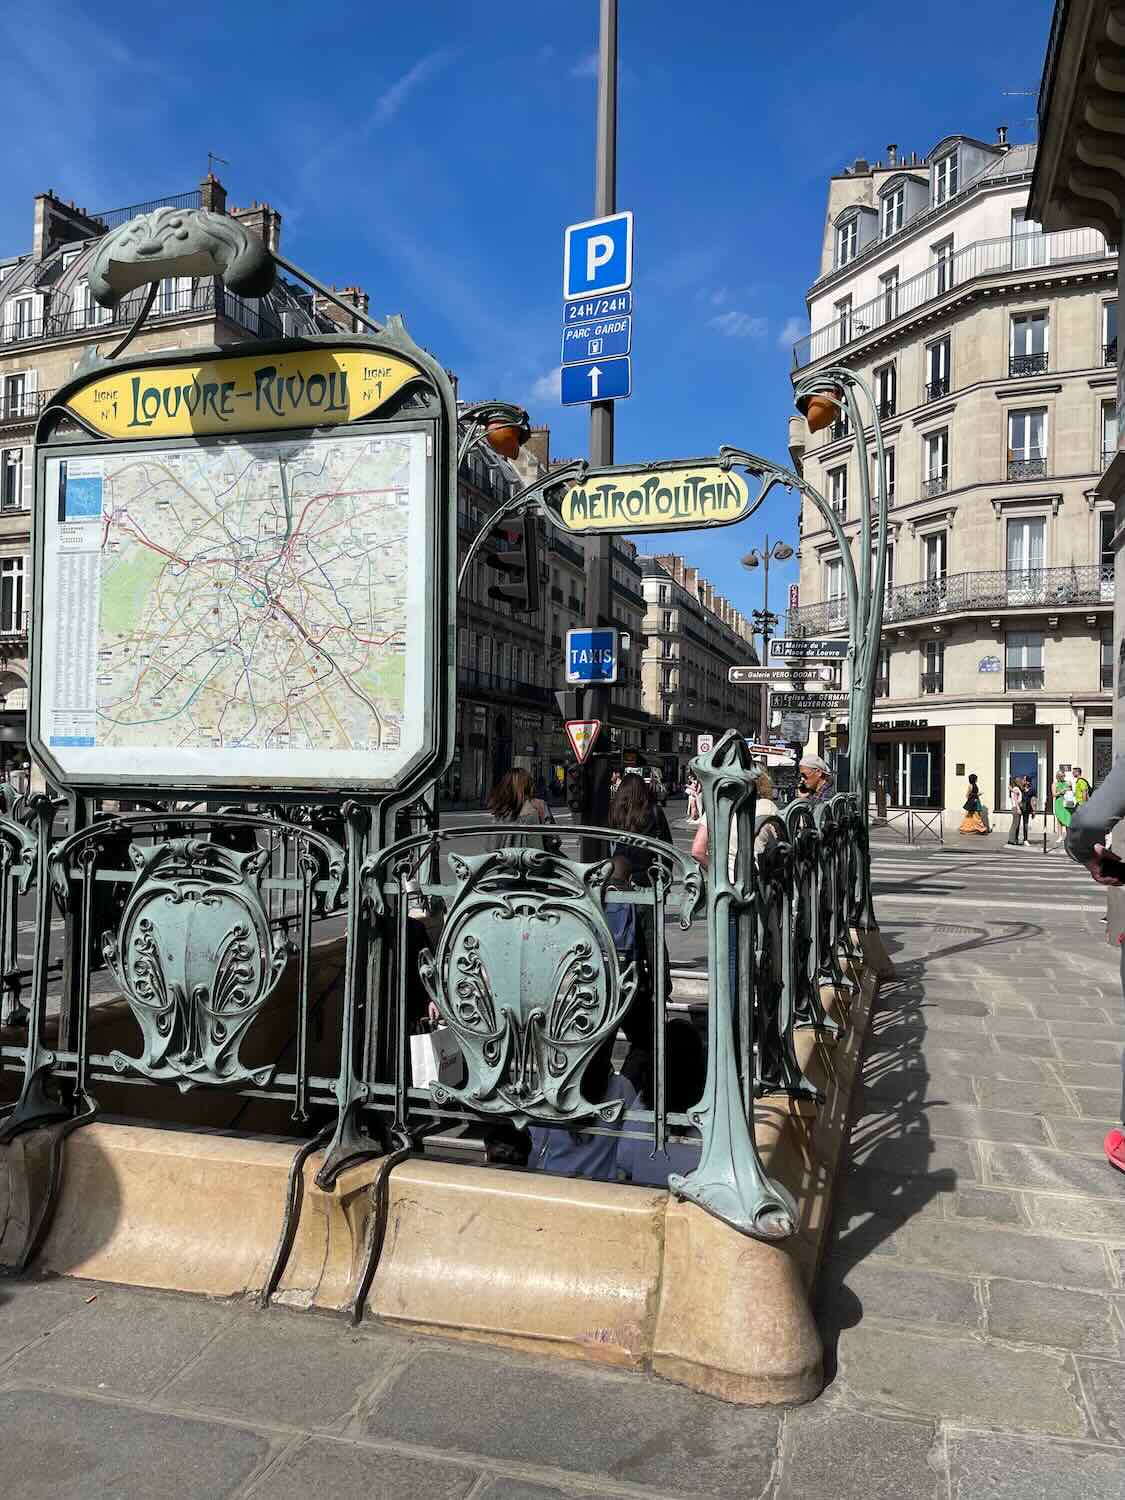 The image features the Louvre-Rivoli metro station entrance in Paris, characterized by its iconic Art Nouveau design. The green, ornate ironwork frames a city map and the metro sign. The backdrop shows typical Parisian architecture and bustling city life with pedestrians in the area.